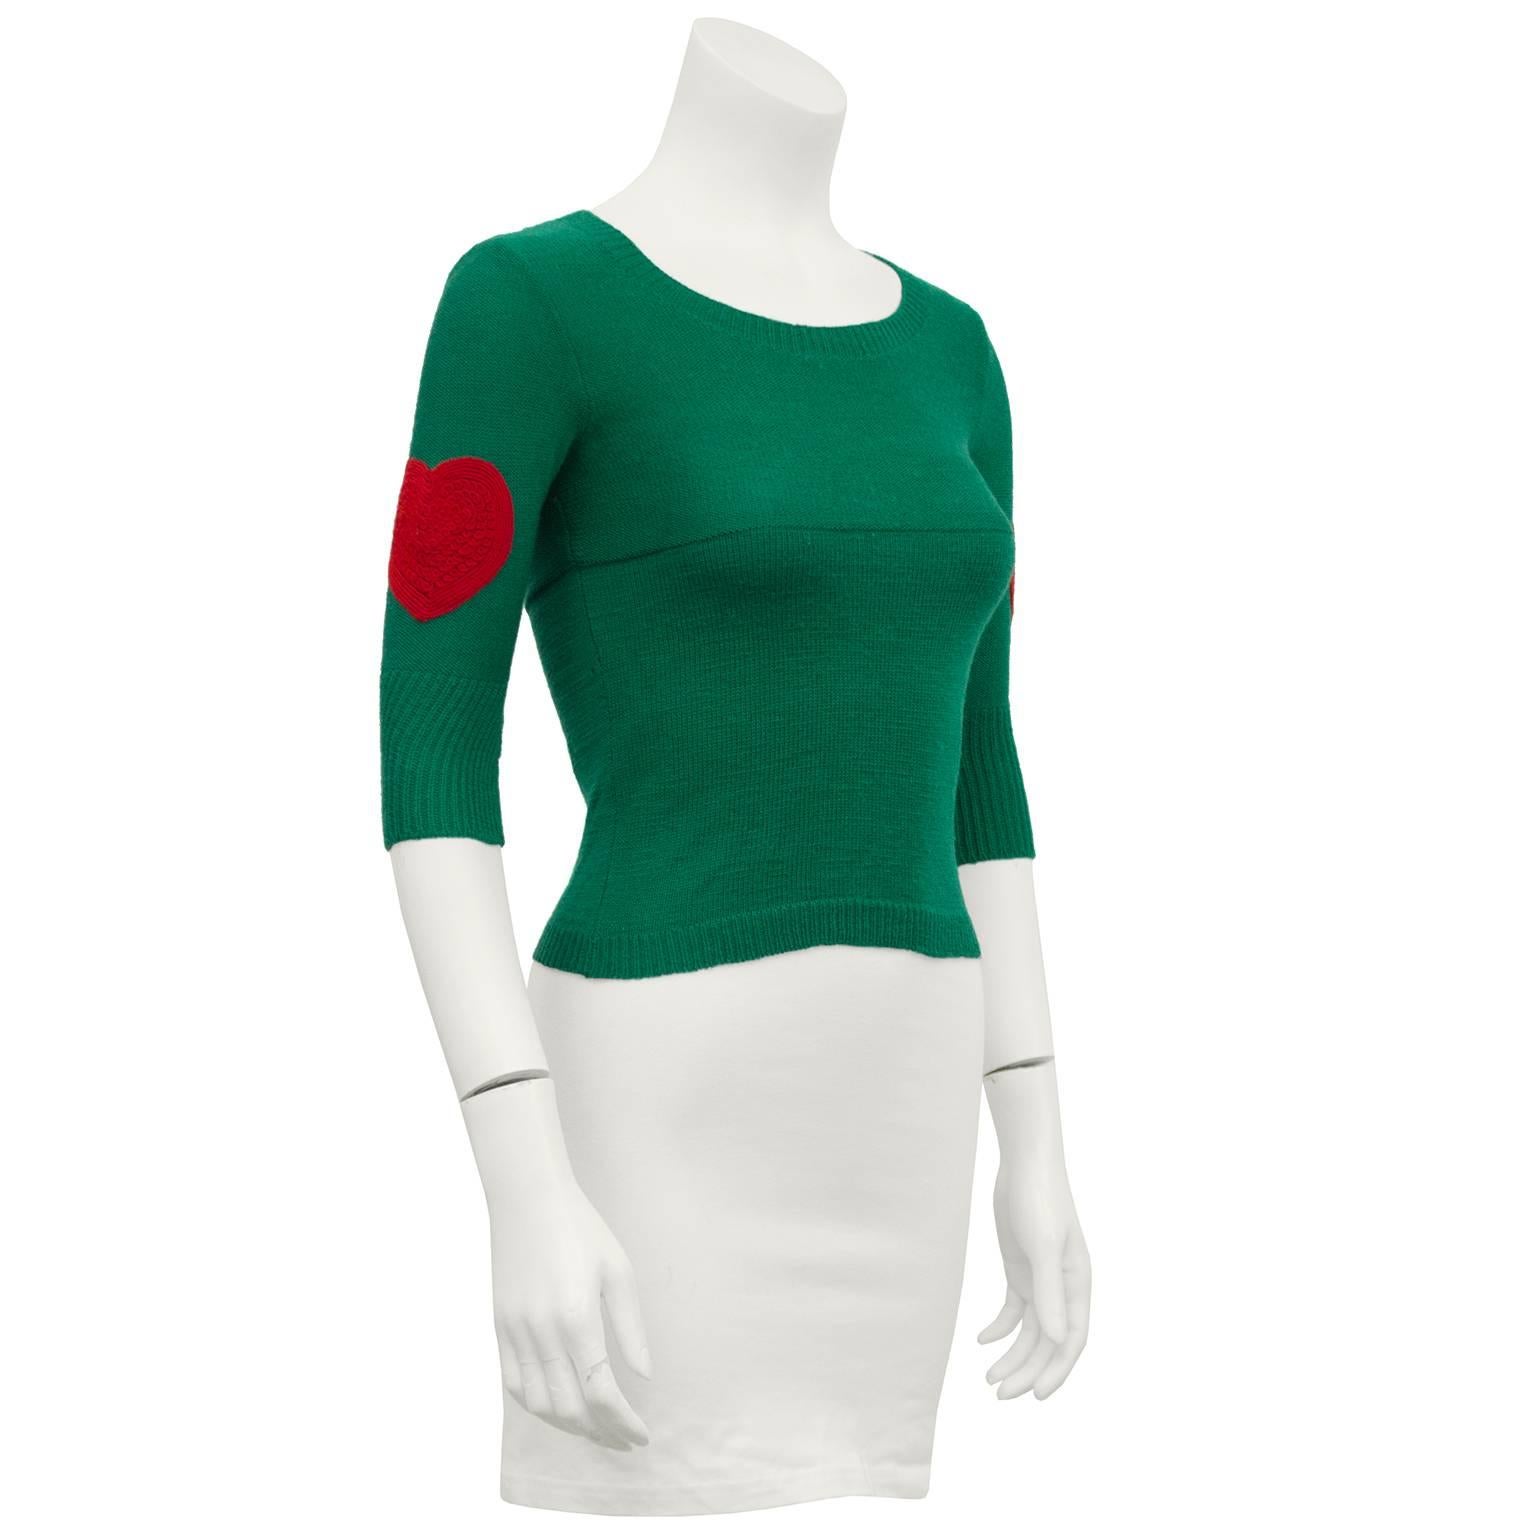 1960's London look adorable cropped kelly green hand knit wool pullover sweater with embroidered bright red heart patches on sleeves. Fits very small - a US 0 - that shrunken look works best over a crisp white collared shirt. Some minor stretch in